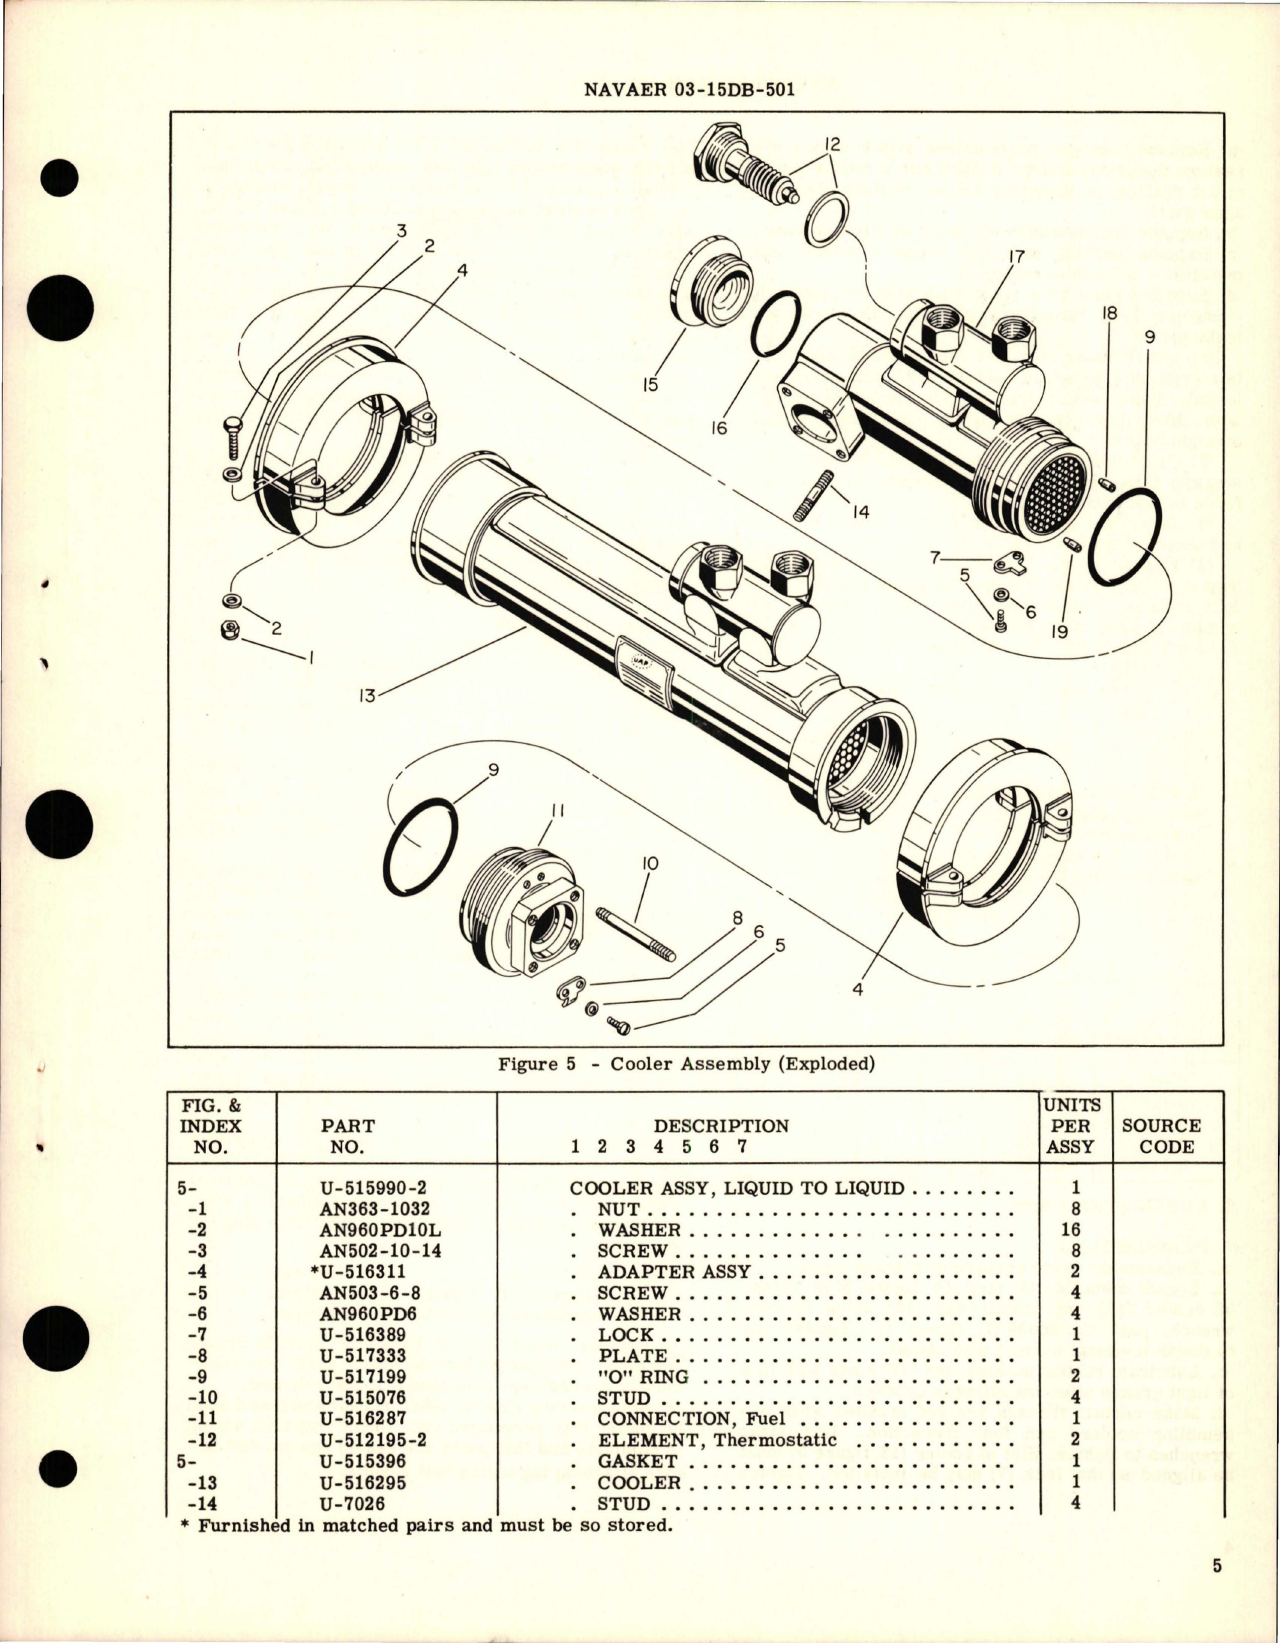 Sample page 5 from AirCorps Library document: Overhaul Instructions with Parts Breakdown for Liquid to Liquid Cooler - U-515990-2